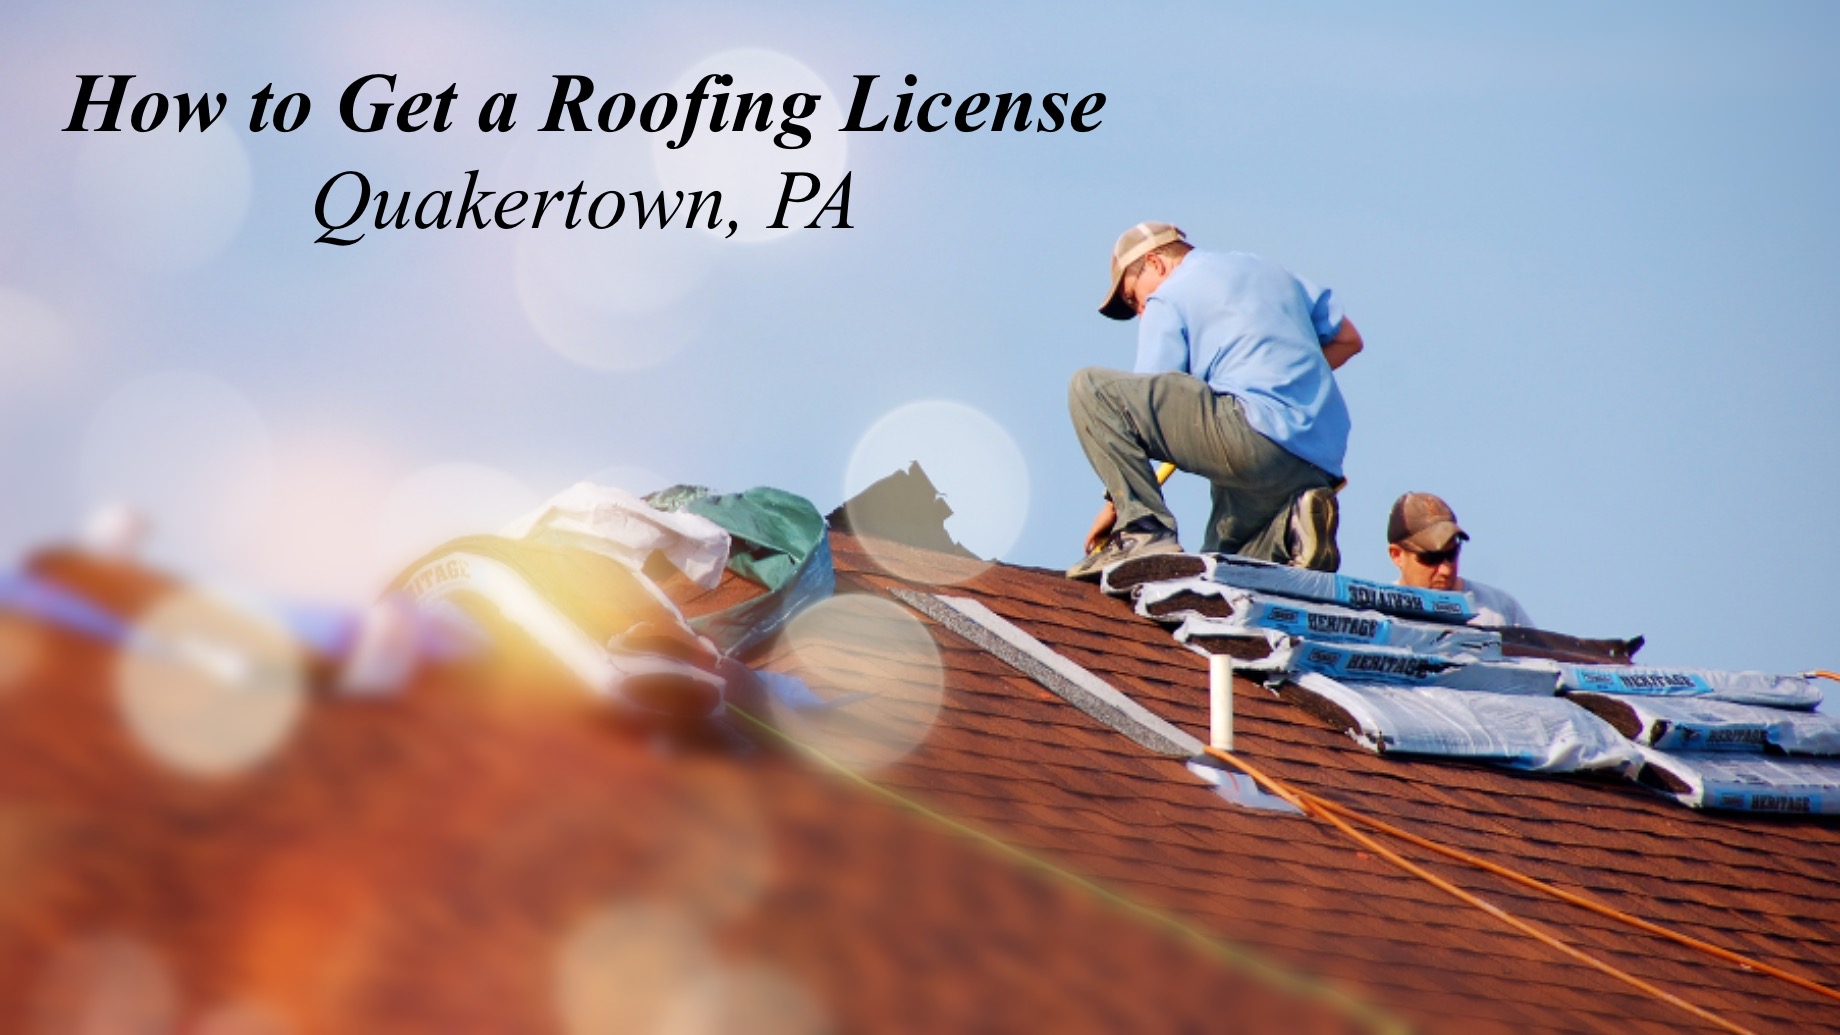 How to Get a Roofing License in Quakertown, PA